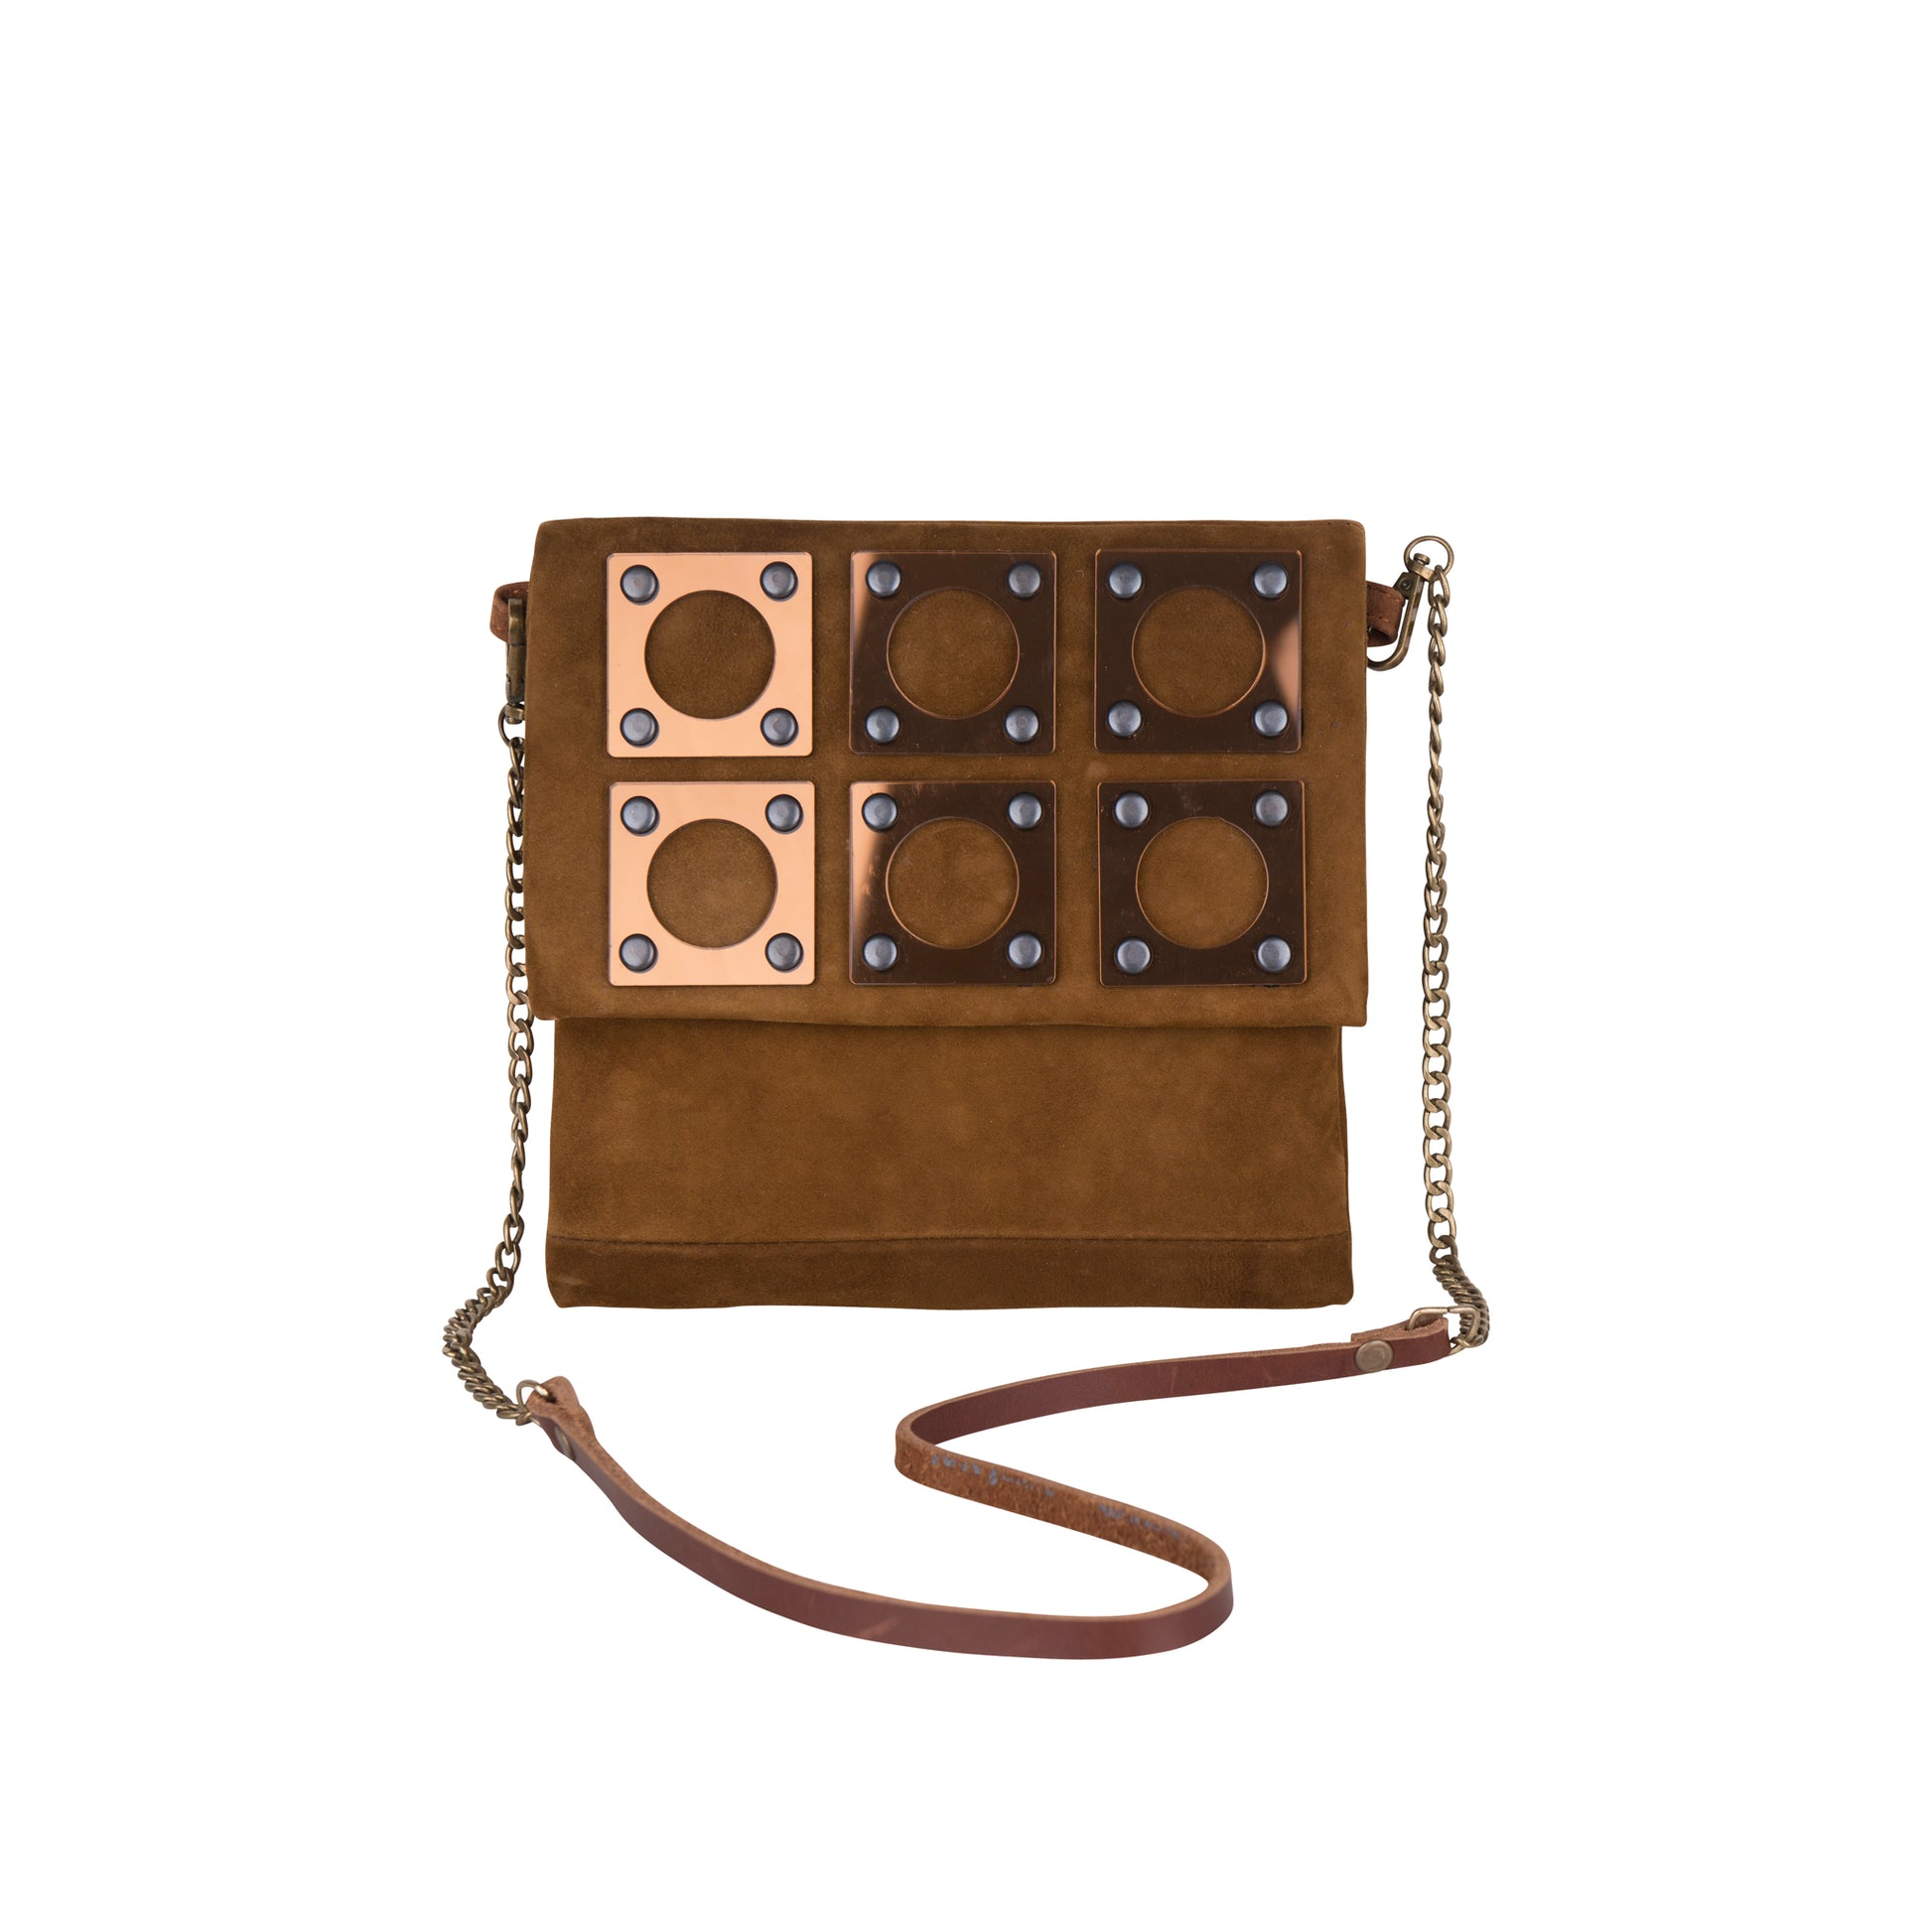 METANoIA tan recycled leather small handbag with square and hollowed circle bronze acrylic forms fashioned into a repeative fashion. 